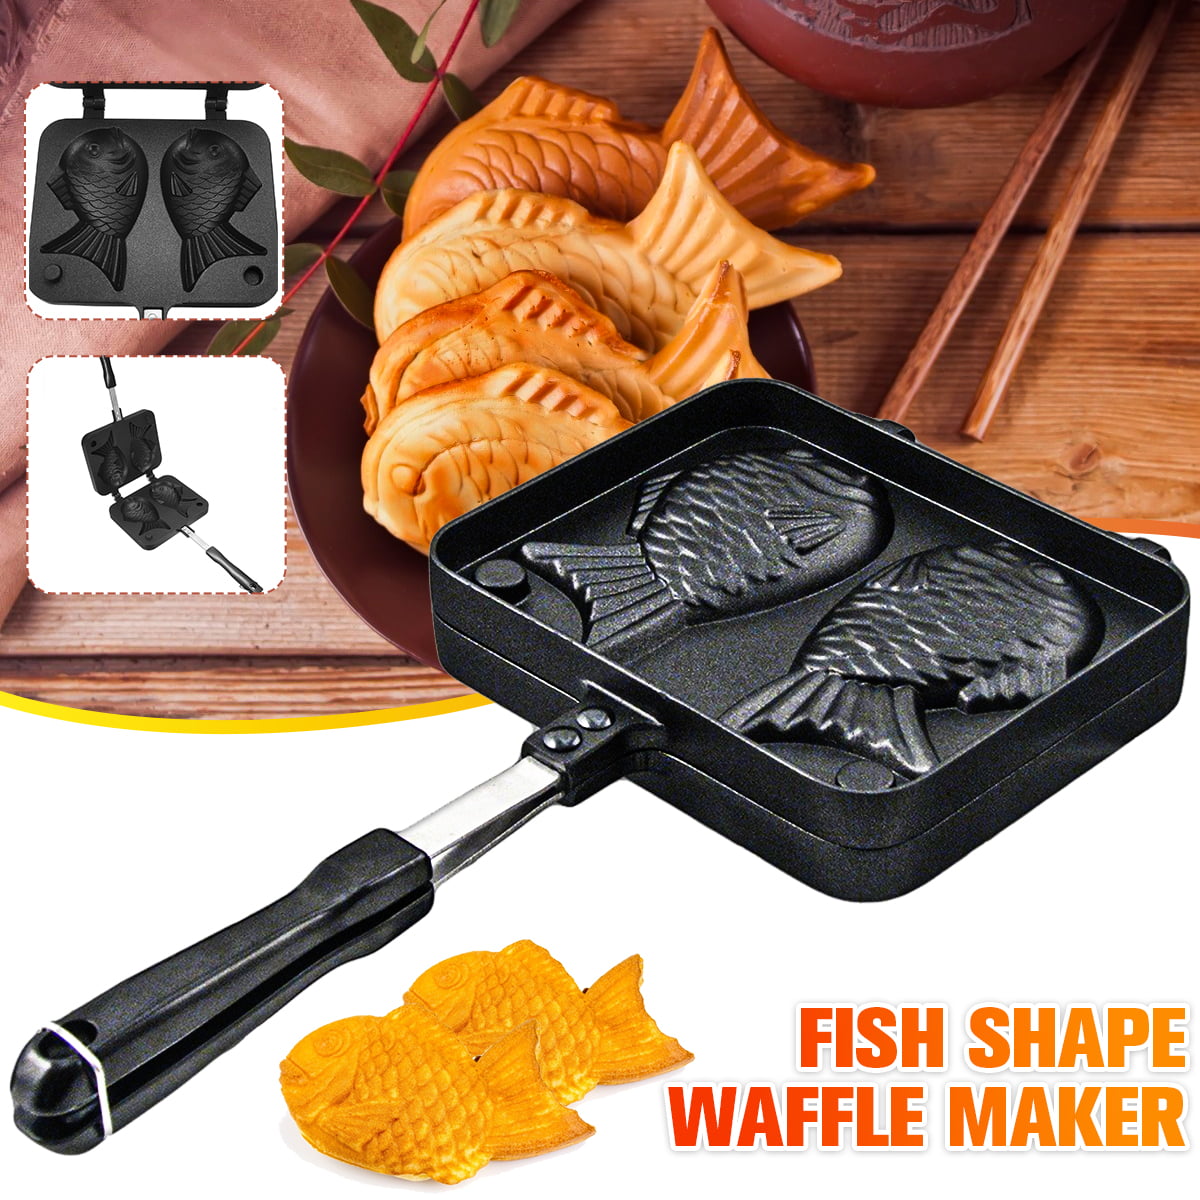 Non-stick Waffle Pan Maker Fish Shape Mold Baking Traditional Mini DIY Food Cooking Cake Bakeware 2 Cast Home Kitchen Healthy Aluminum Taiyaki Hot Dessert Tool Personal Size